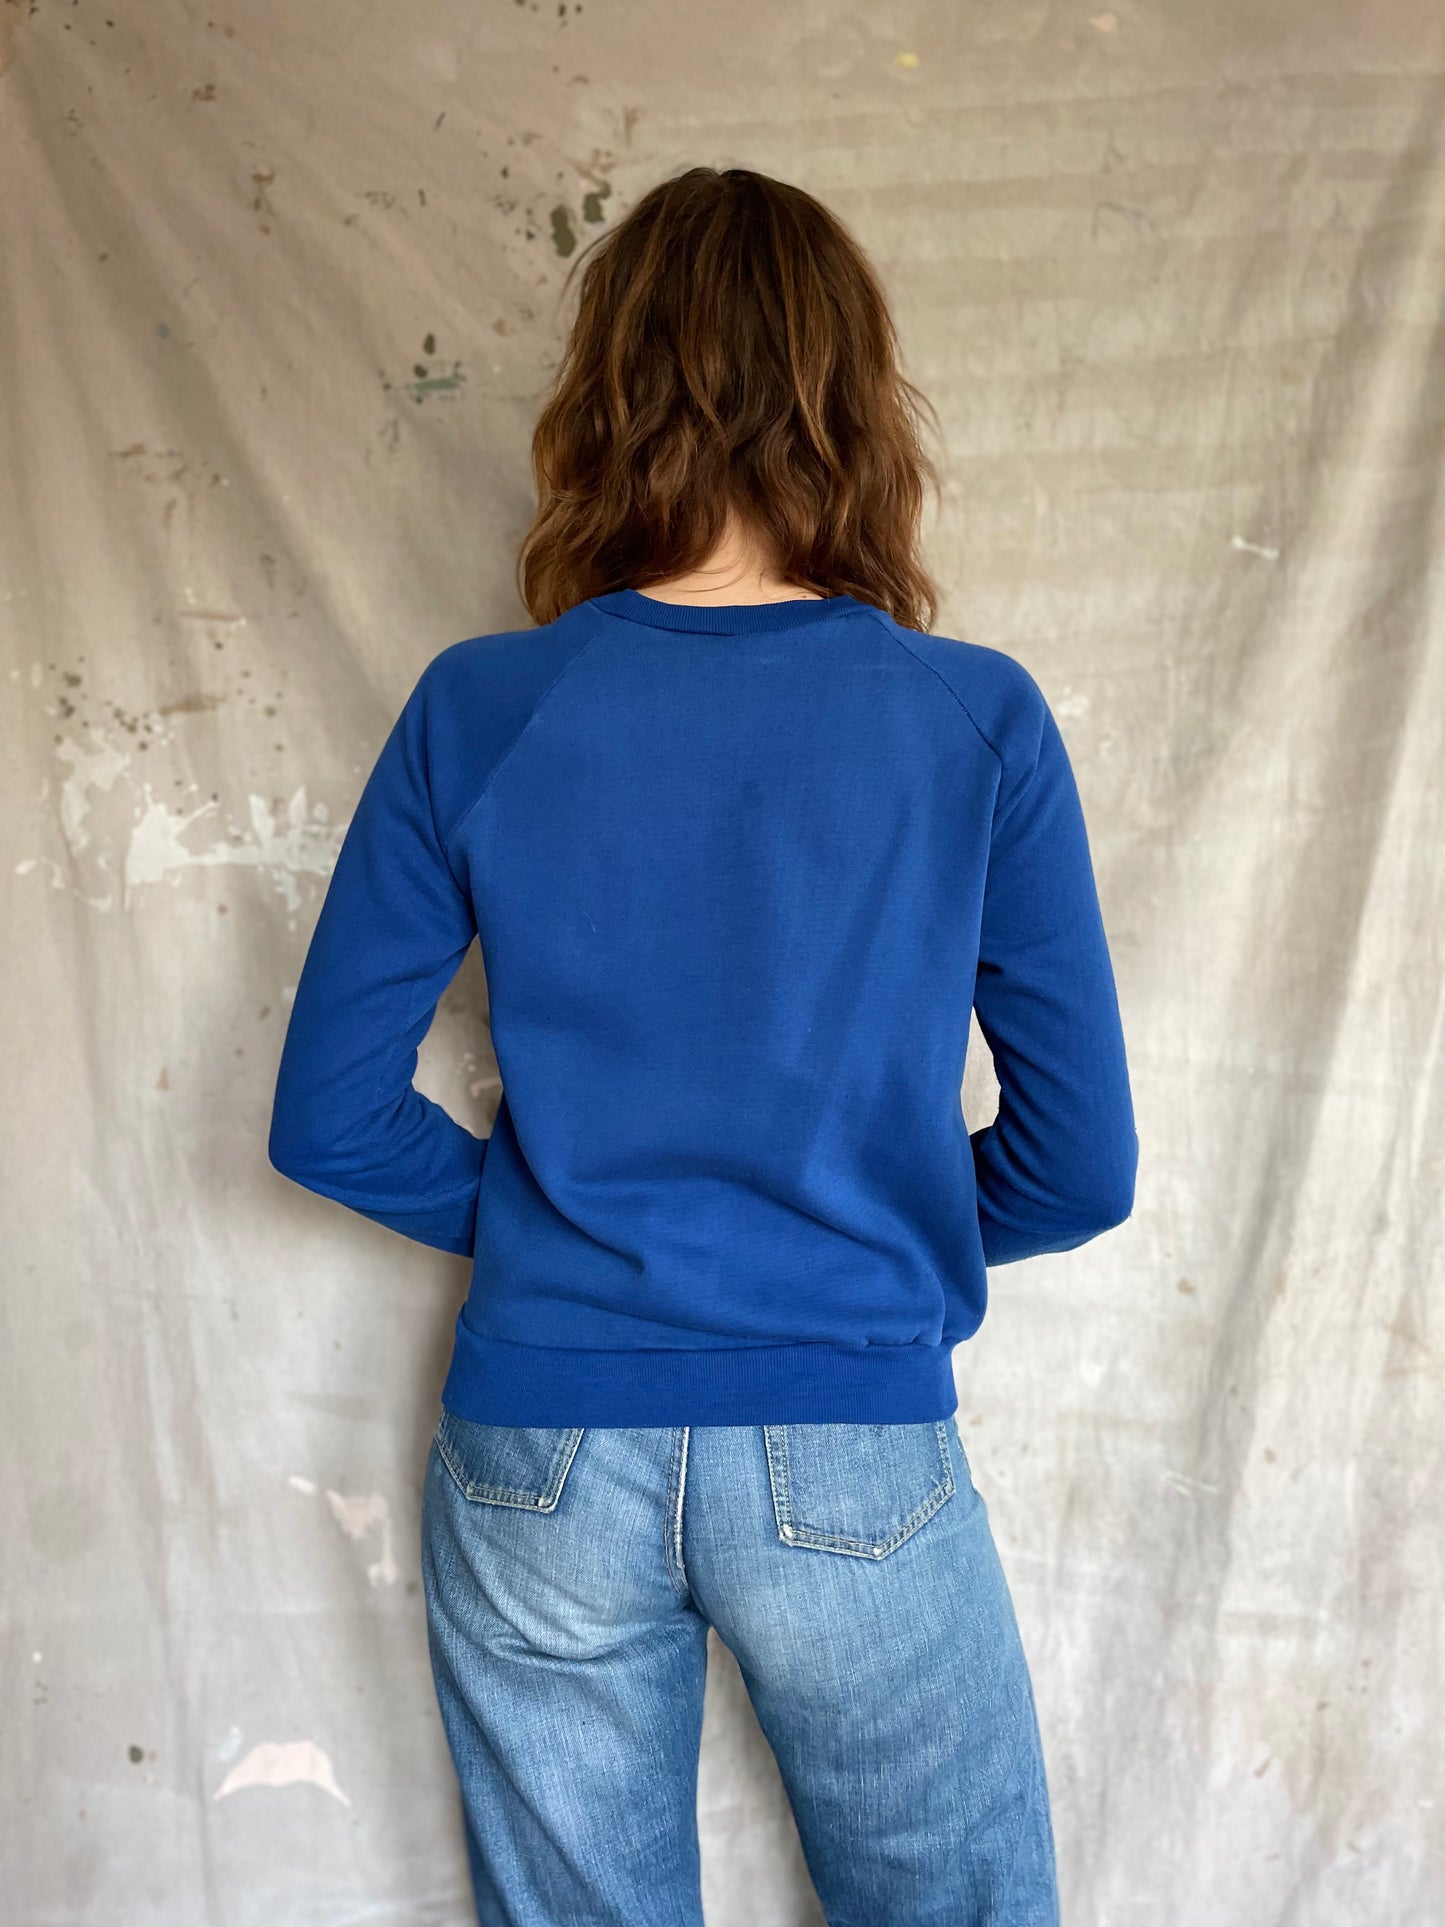 80s Royal Blue Paint Stained Sweatshirt